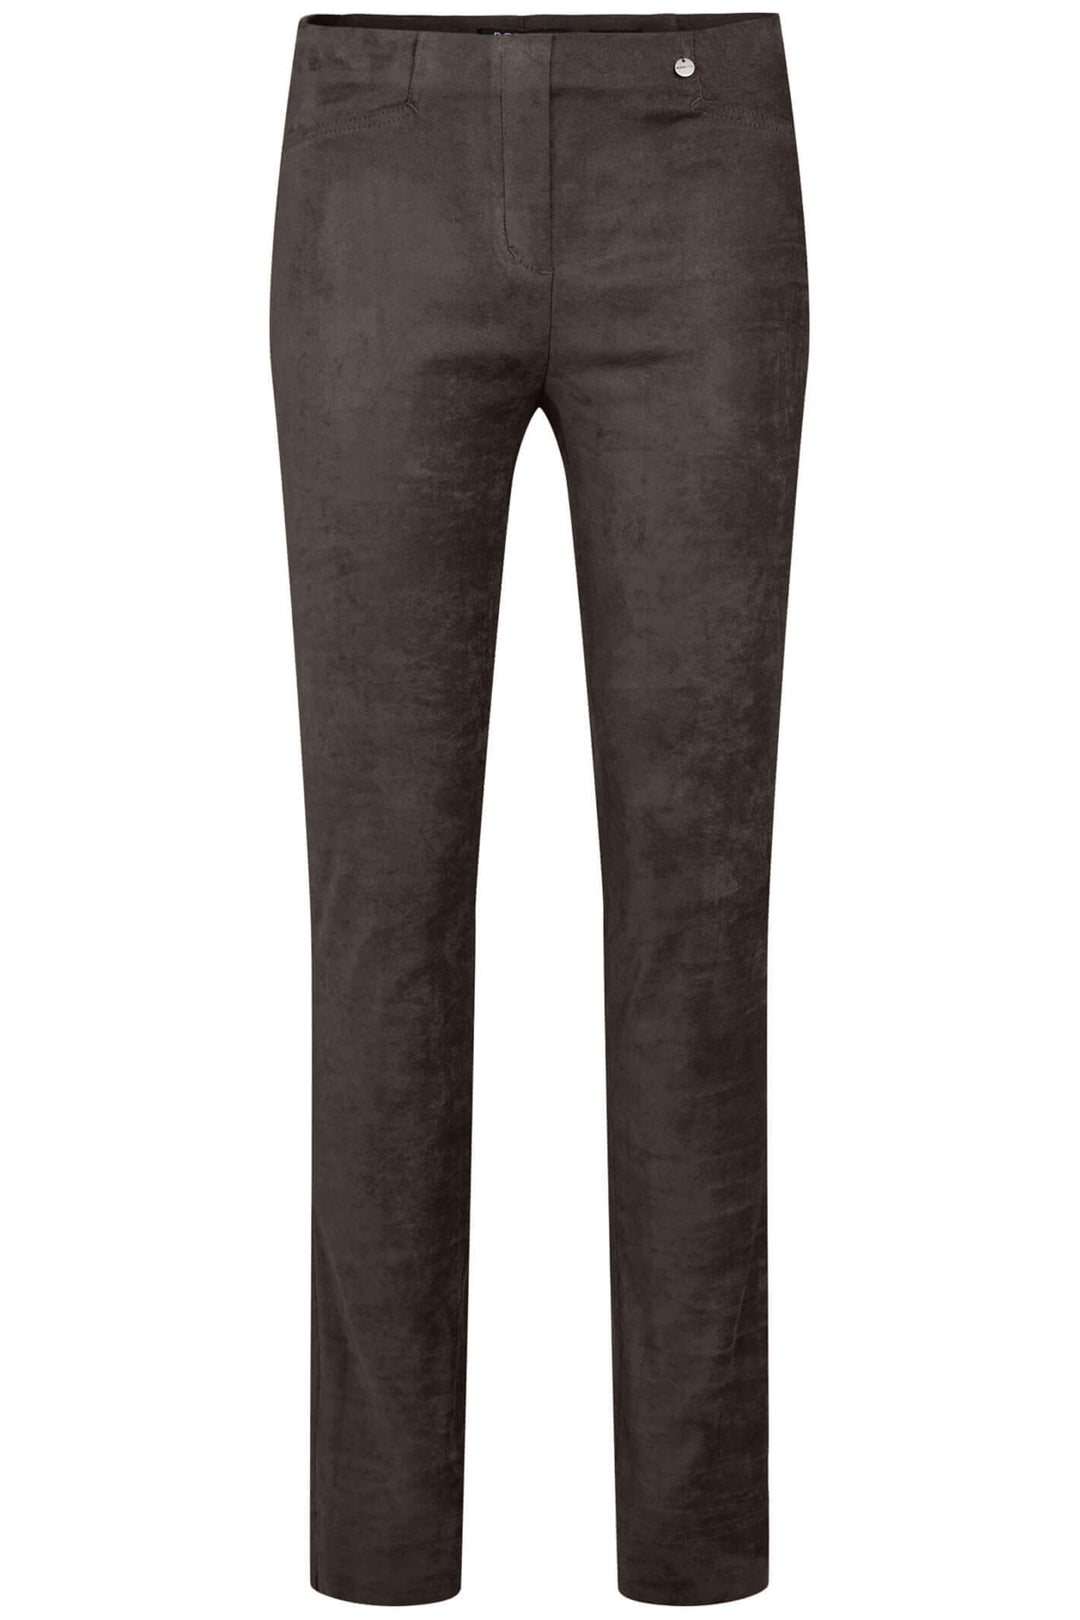 Robell 51673 39 Brown Stretch Faux Suede Trousers - Experience Boutique